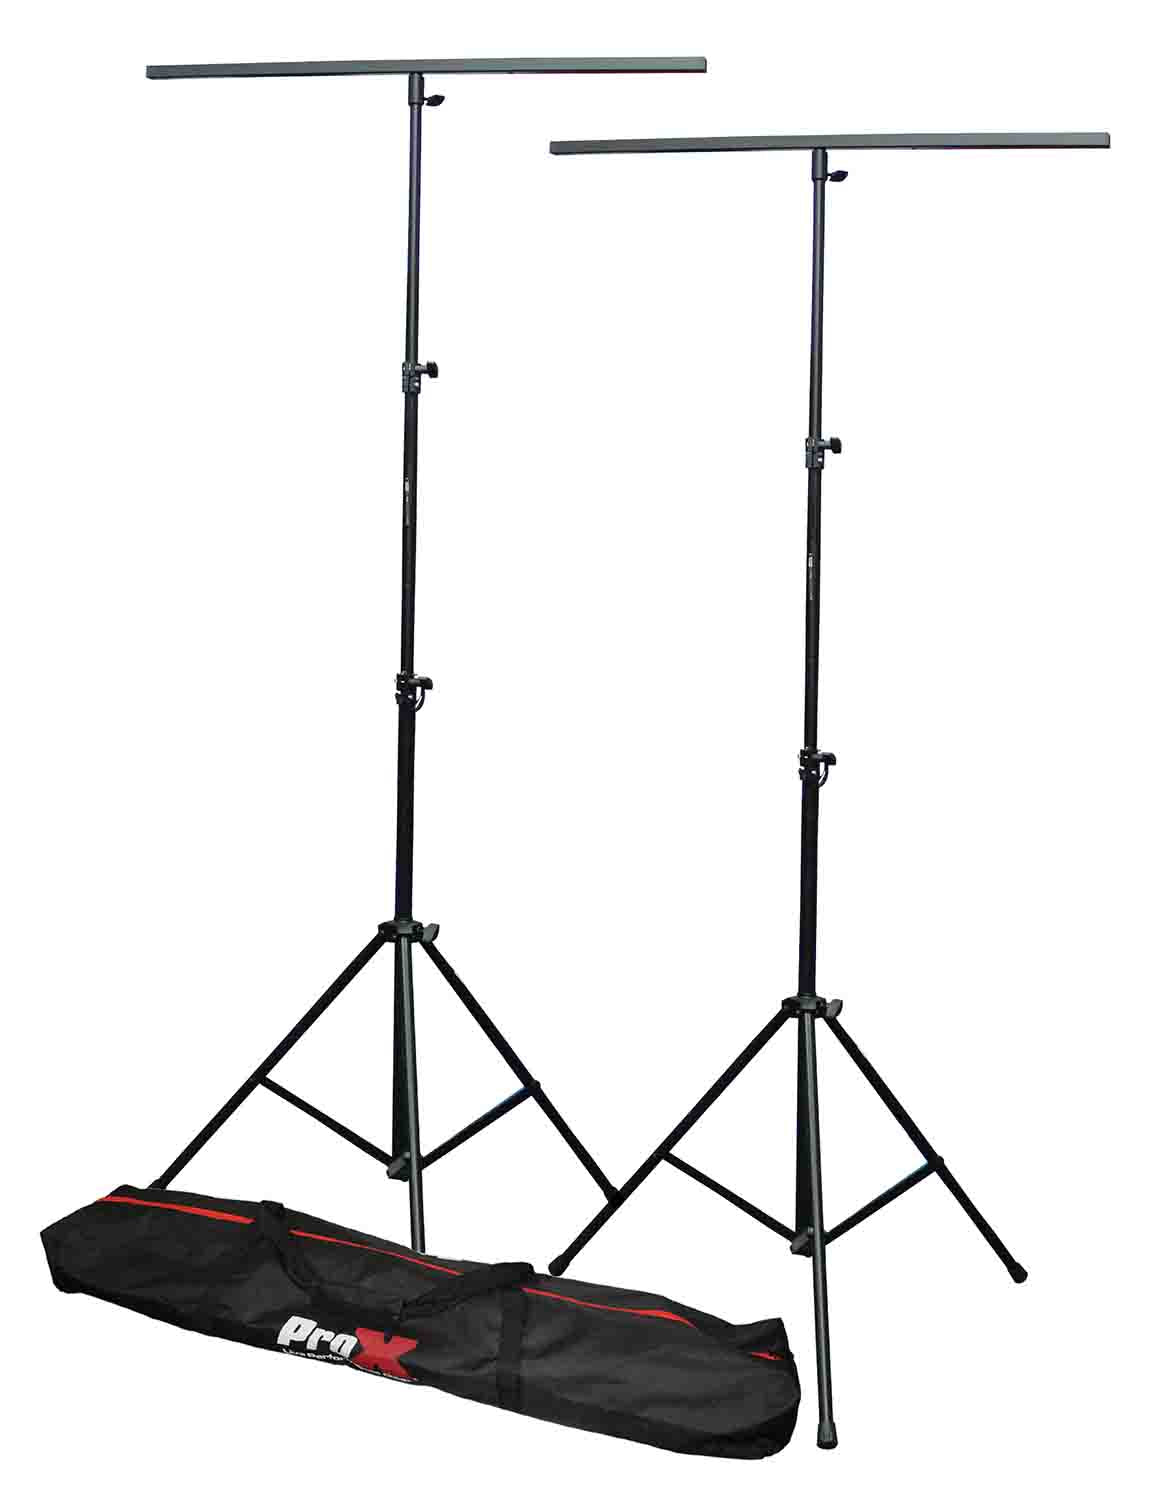 ProX T-LS03M-9FTPKG DJ Lighting Stand Package with 2 Stands Square T-Bars Carry Case - 9 Feet Height by ProX Cases